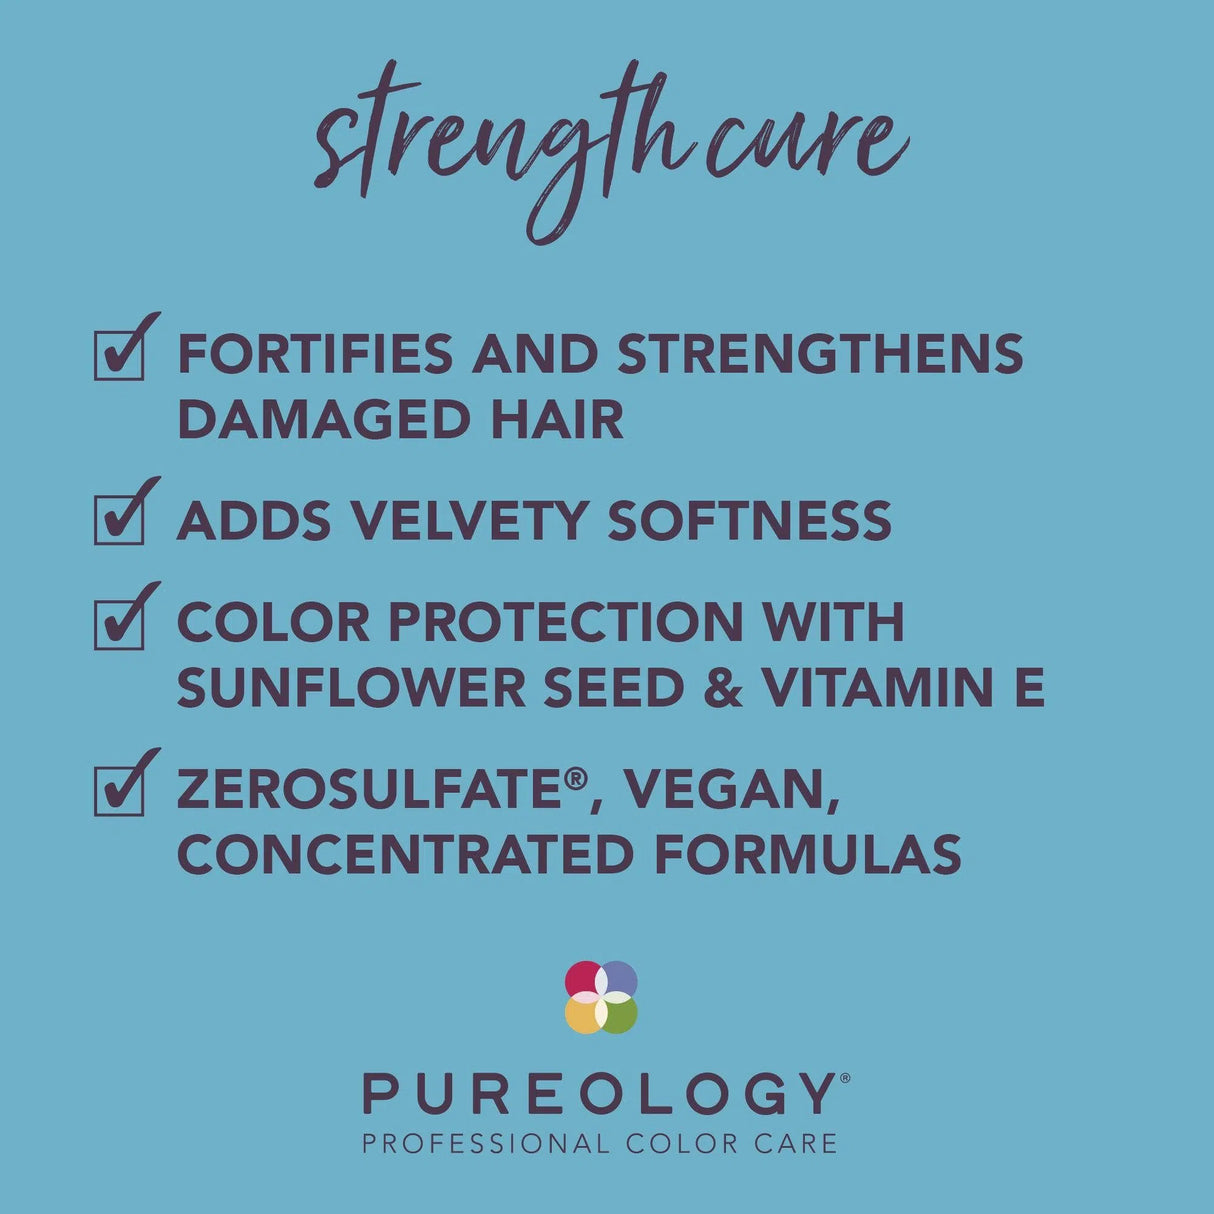 Strength Cure Superfood Treatment-Pureology